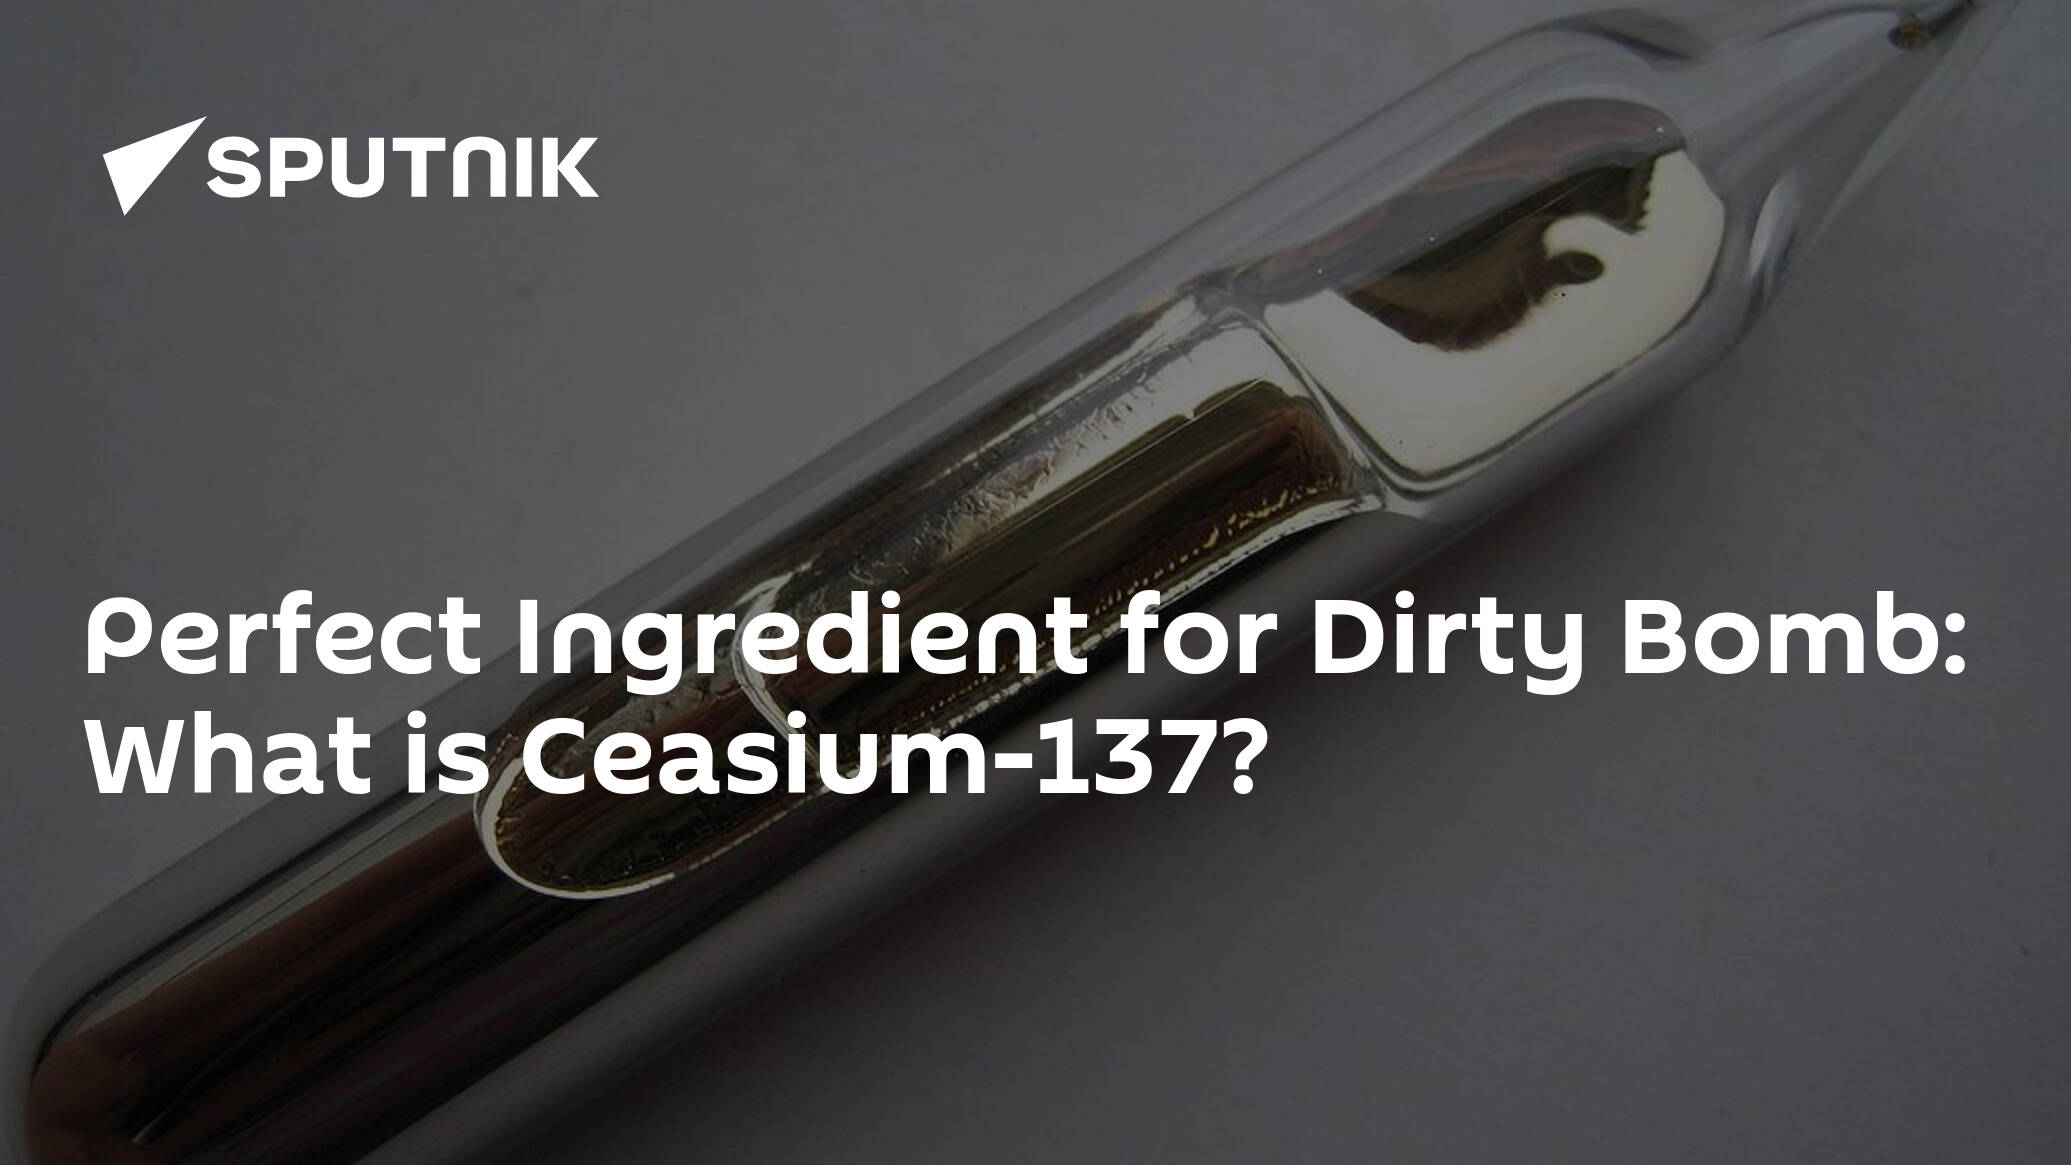 Perfect Ingredient for Dirty Bomb: What is Ceasium-137?